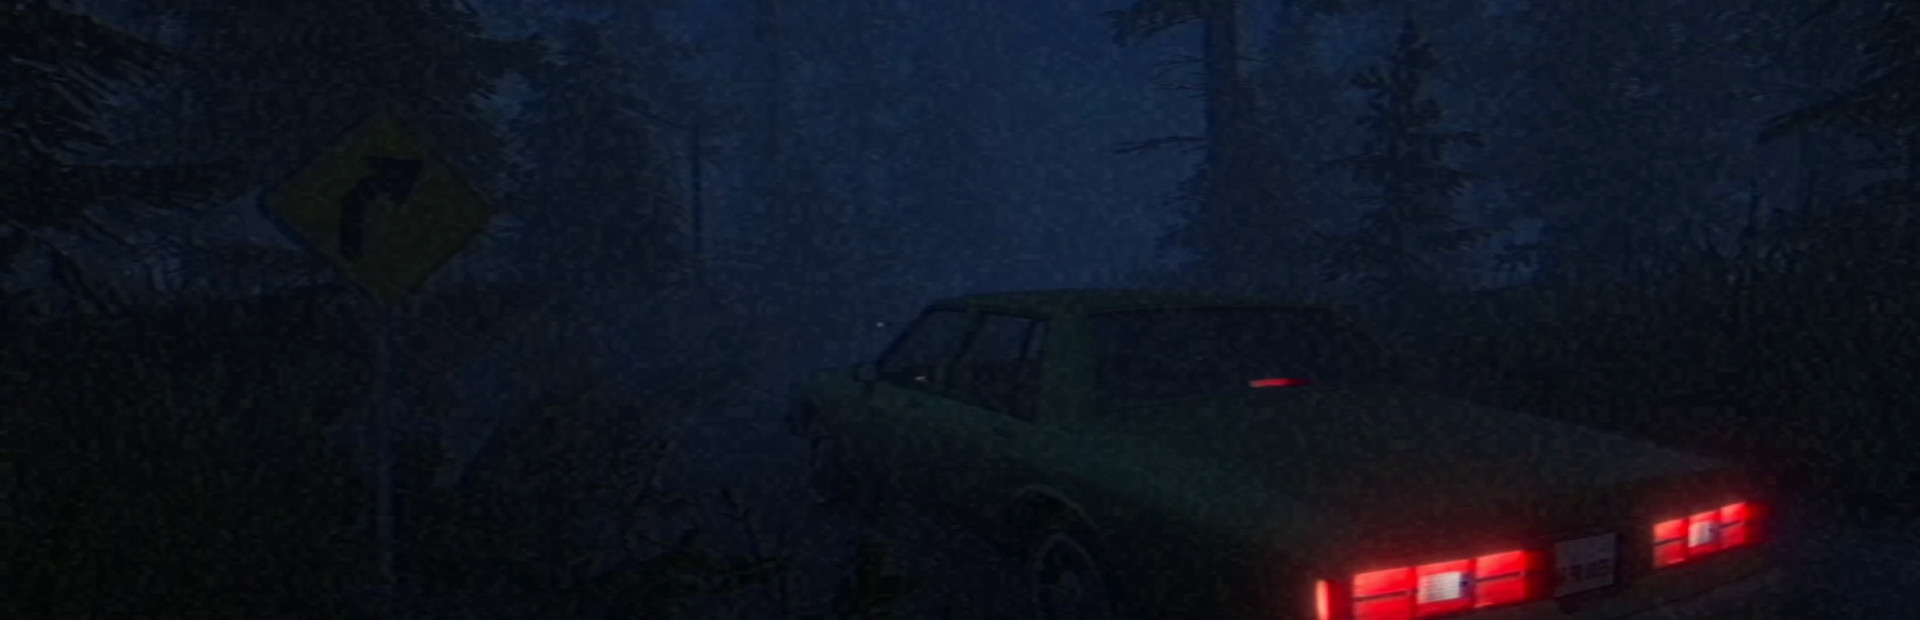 Friday the 13th: The Game - SteamGridDB